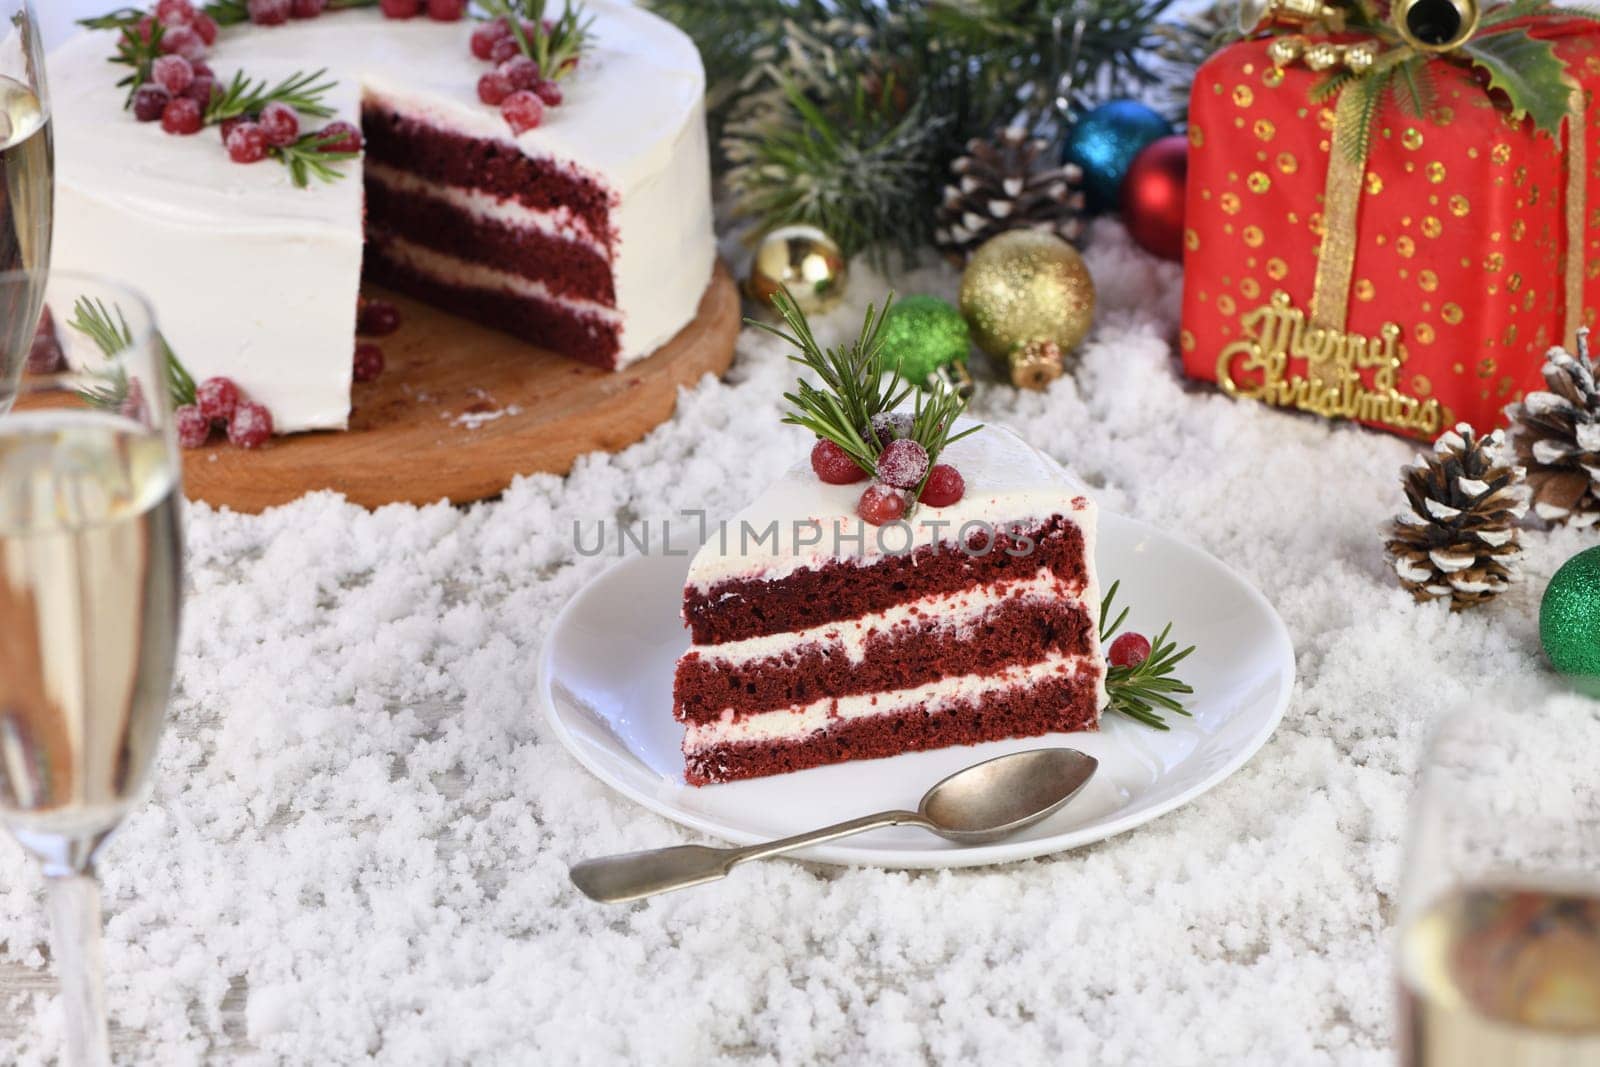  Piece of Red Velvet Cake by Apolonia